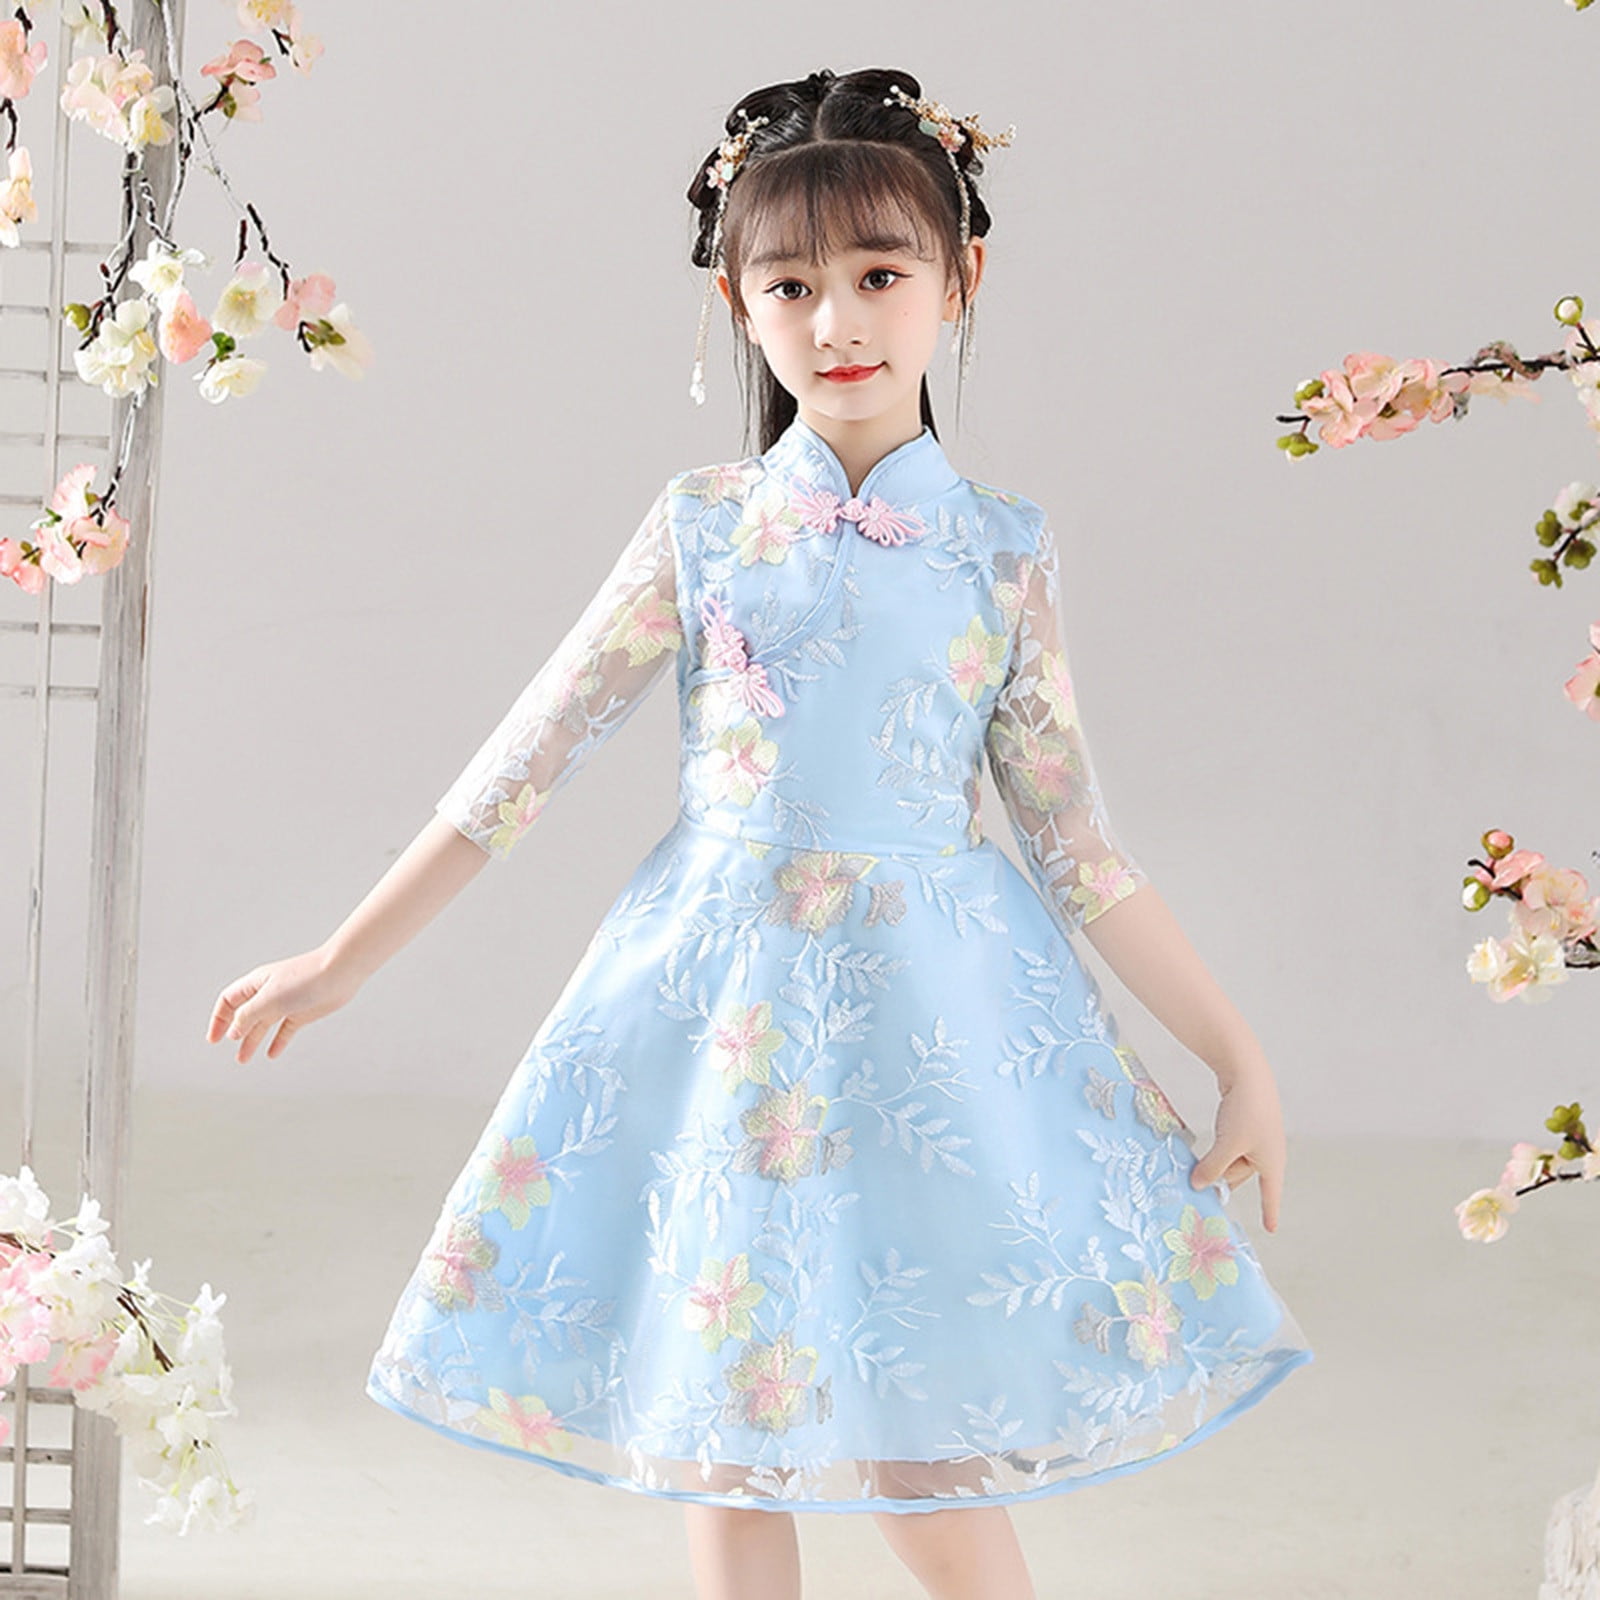 New arrival products from Rosewe.com | Print chiffon dress, Shop casual  dresses, Women's fashion dresses